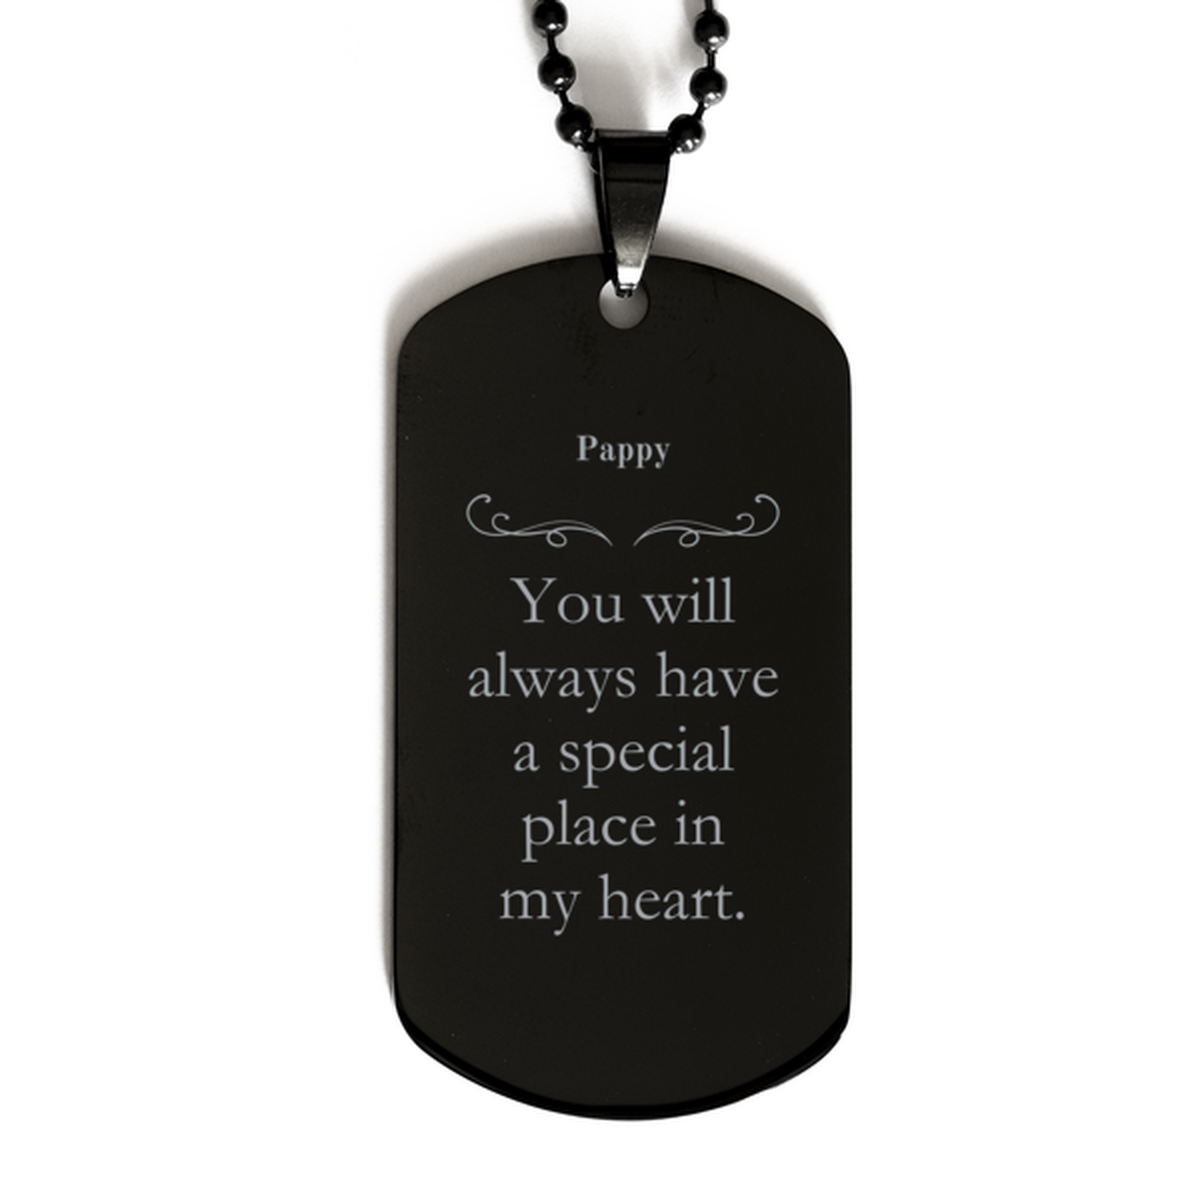 Black Dog Tag Pappy Memorial Engraved Necklace - Perfect Gift for Veterans Day and Birthday Celebrations